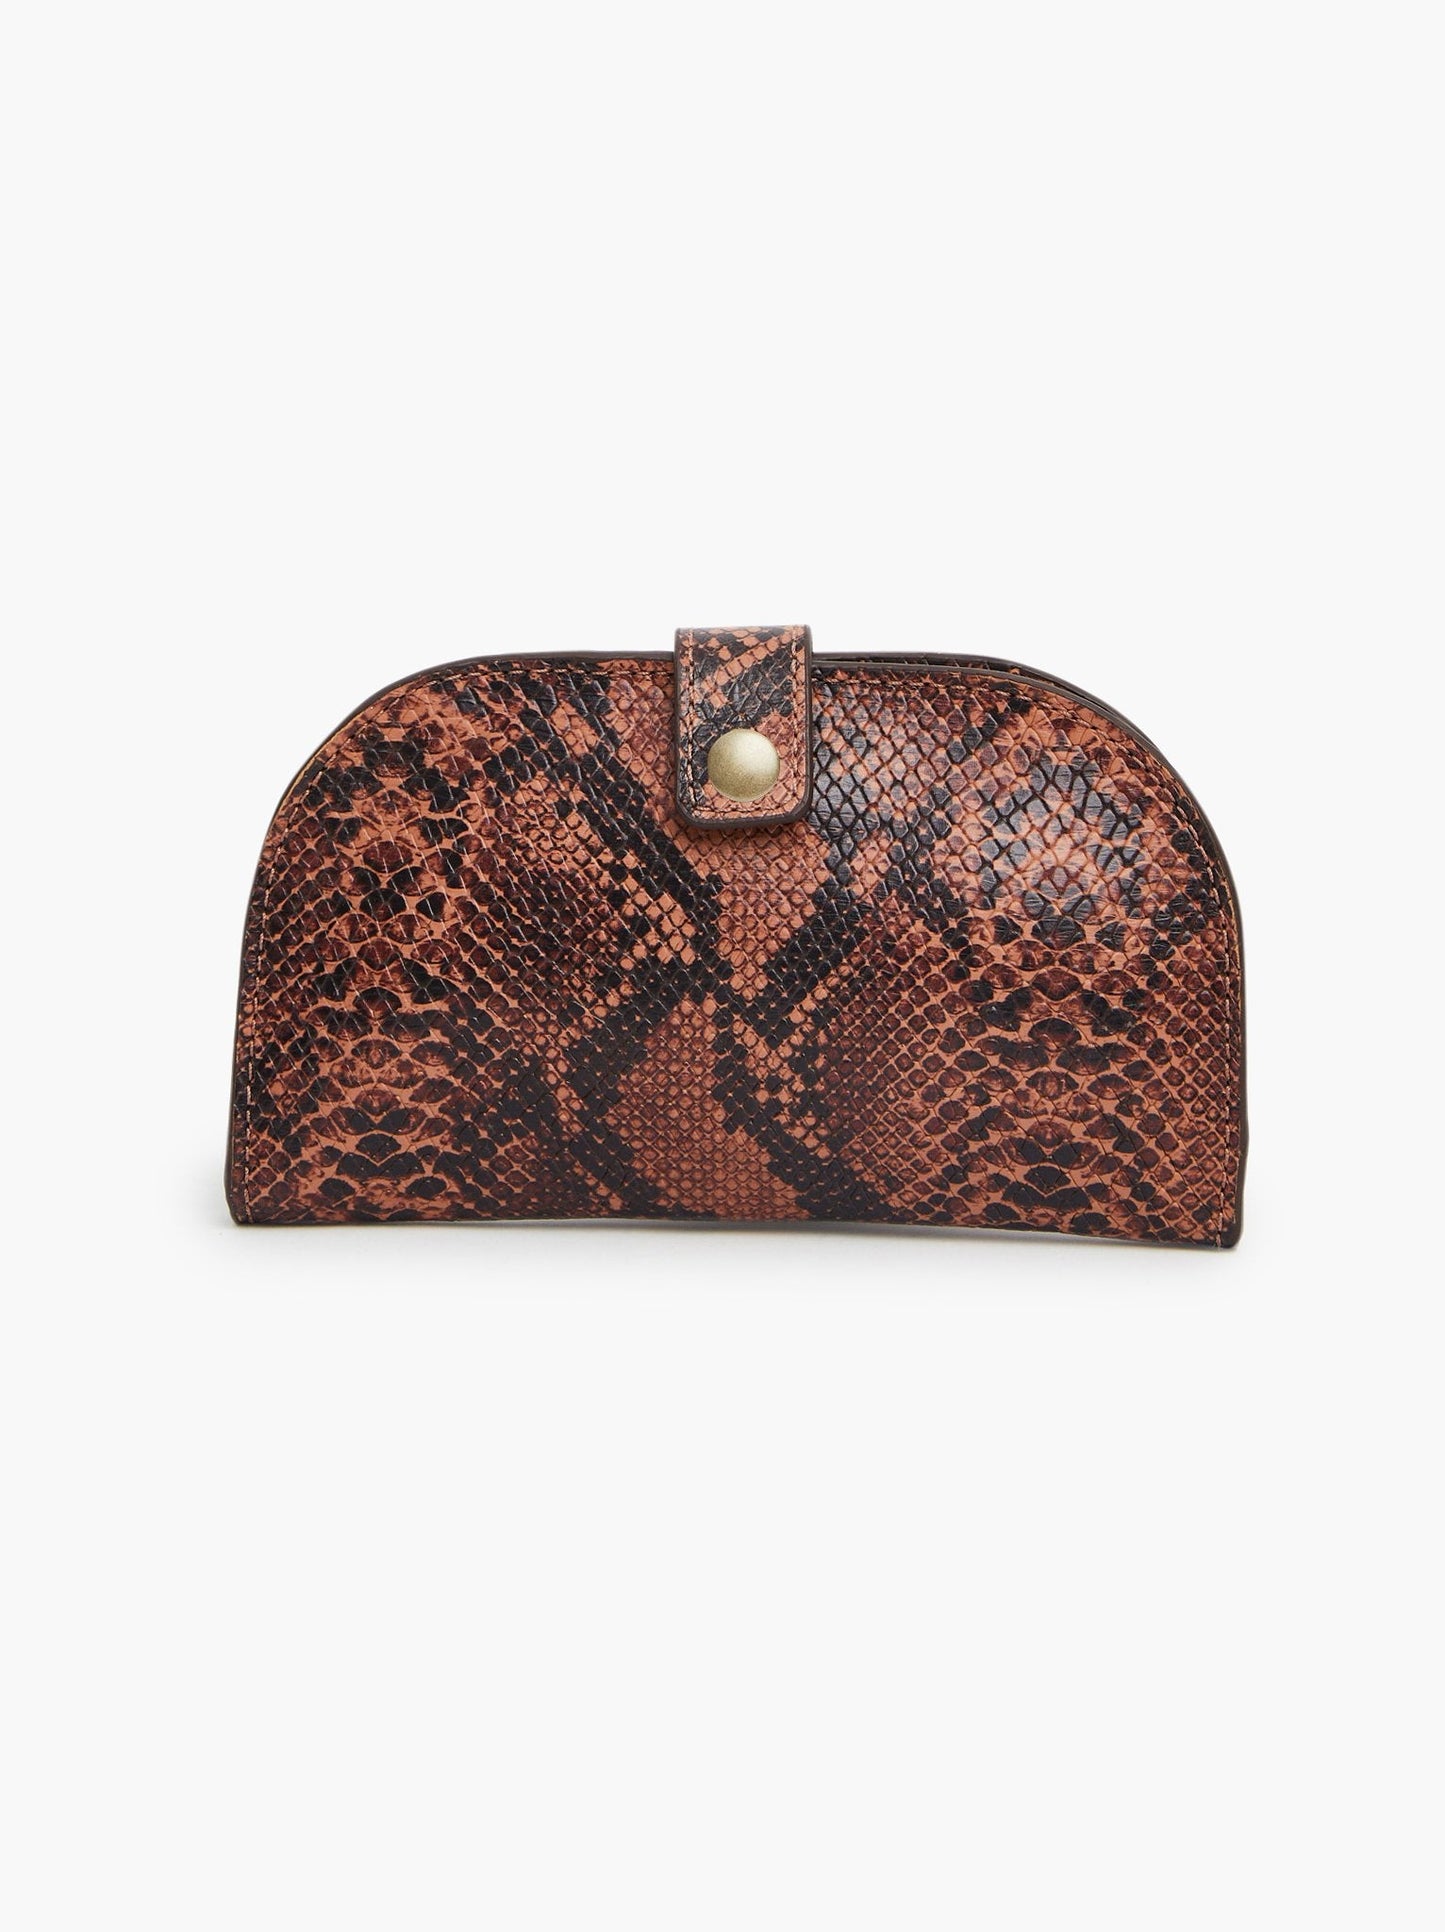 Able Marisol Wallet Wallets in Saddle Snake at Wrapsody